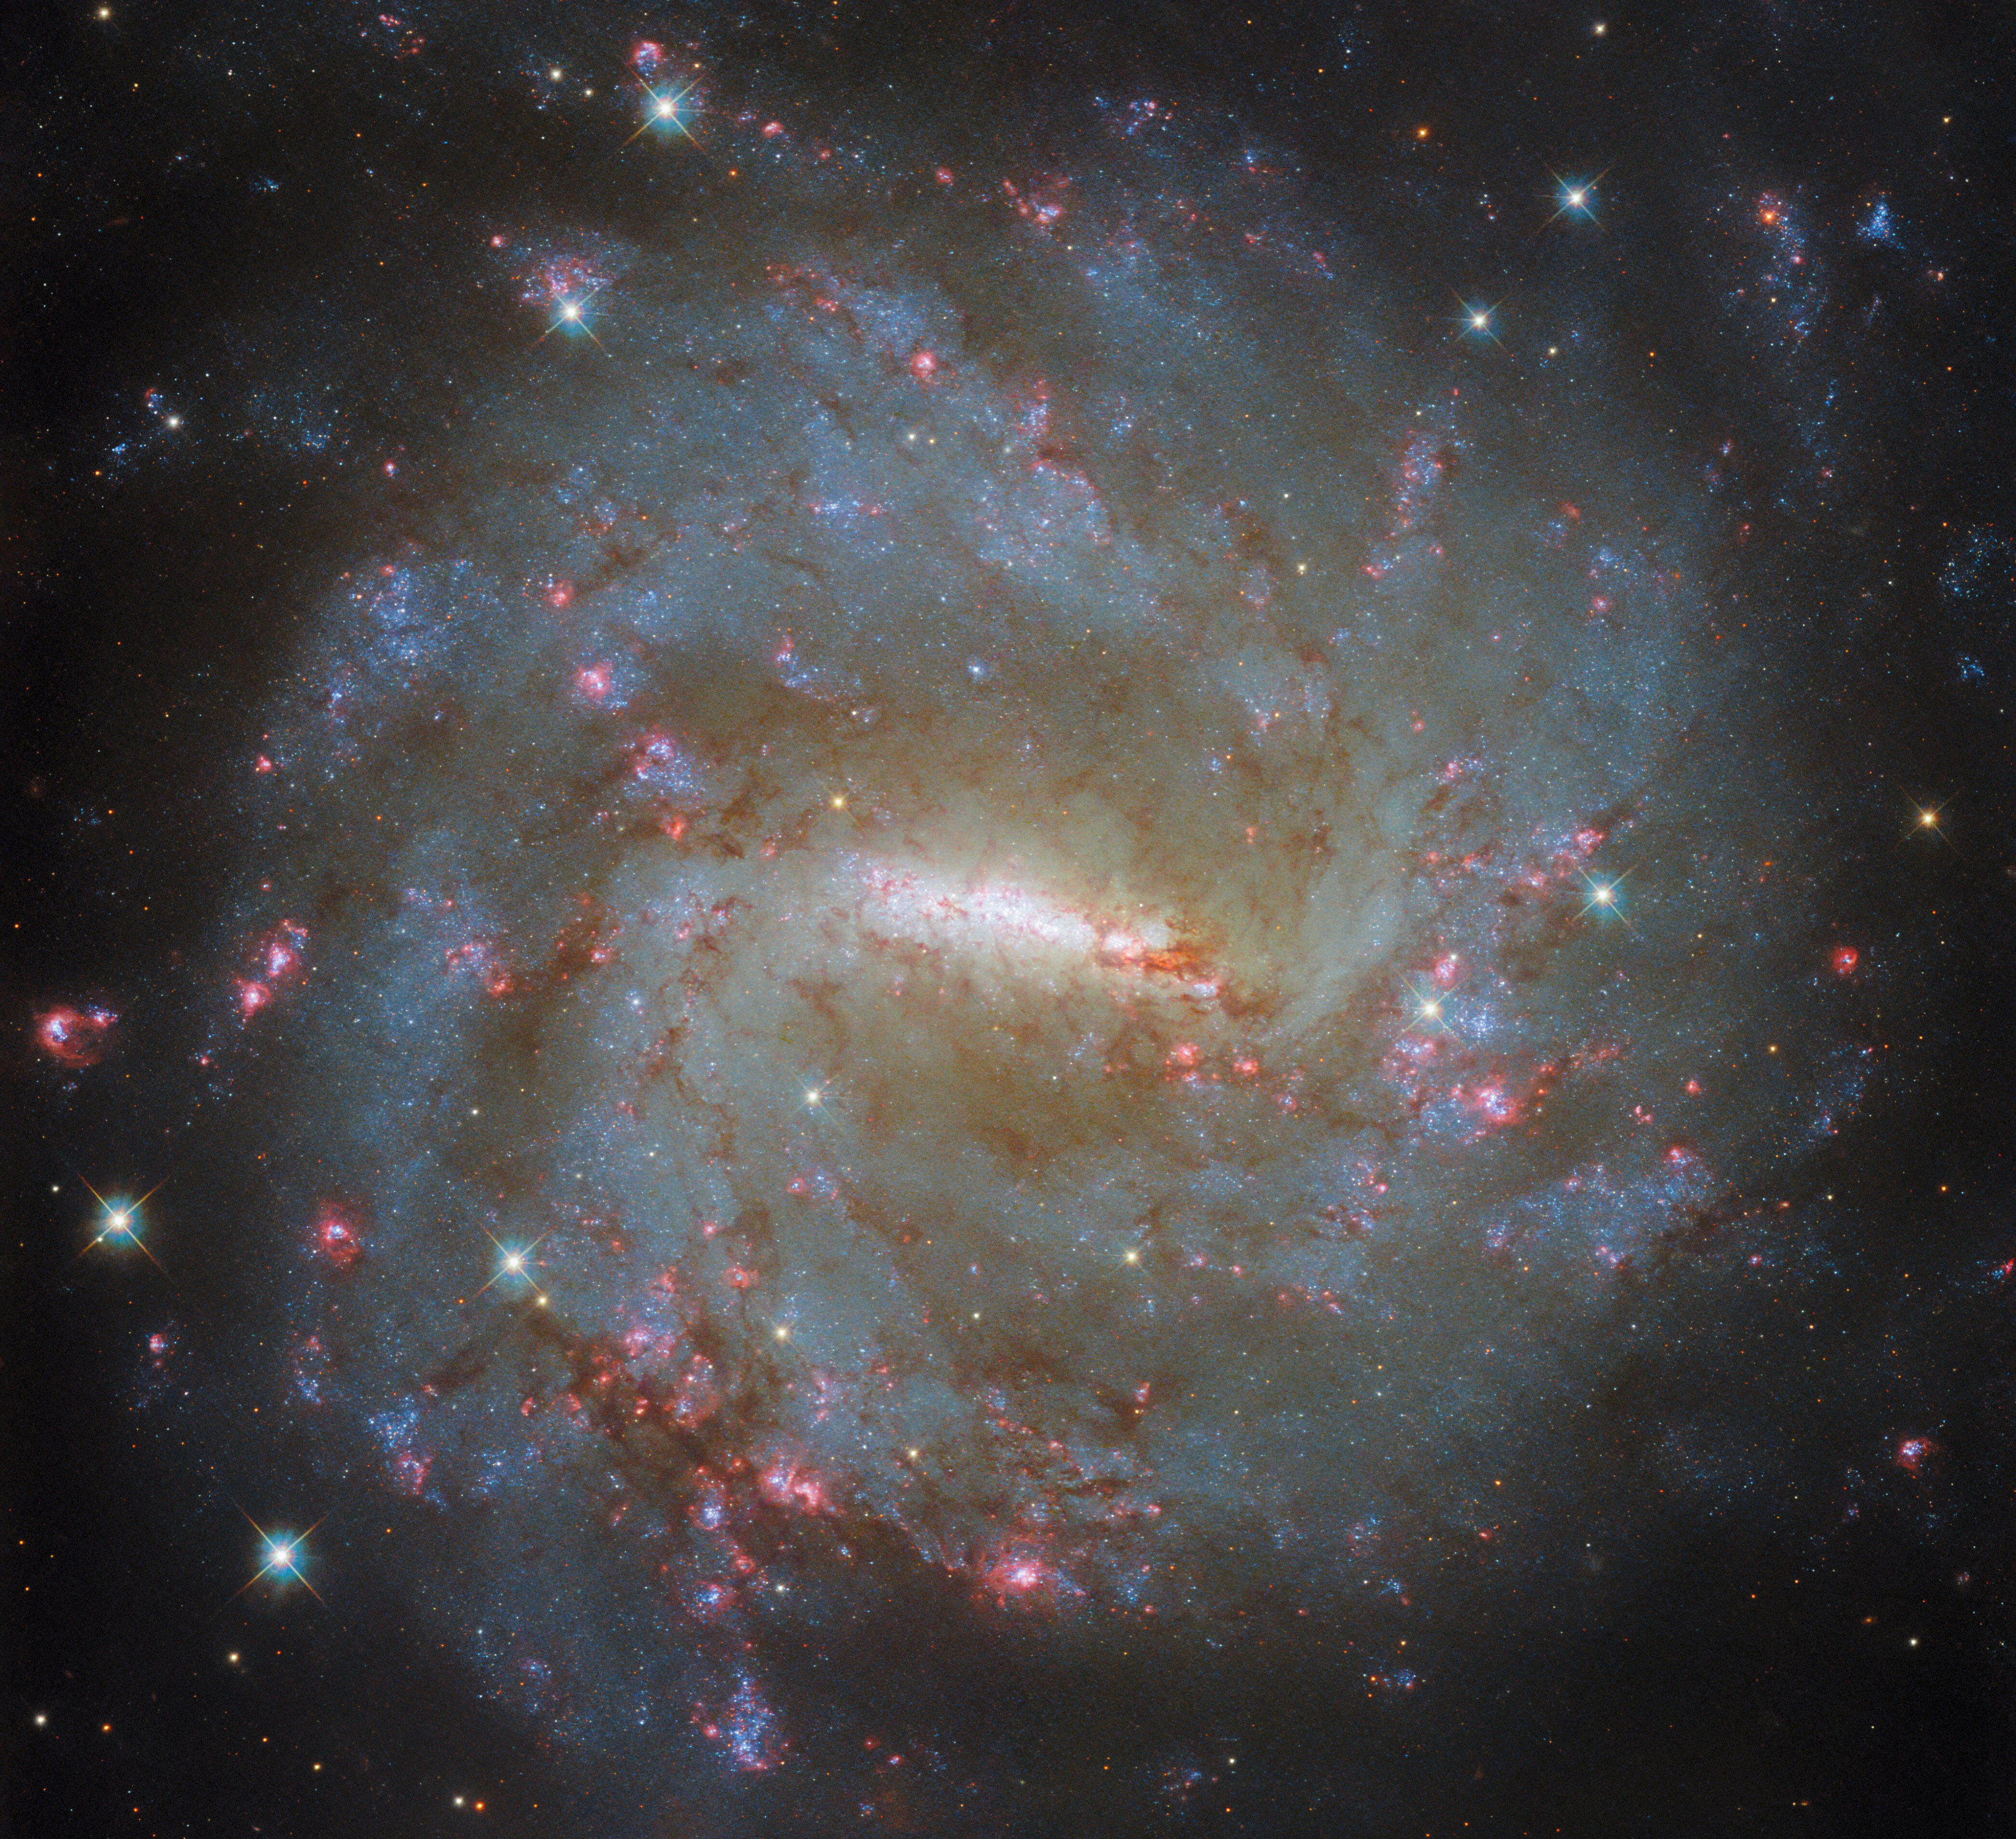 A barred spiral galaxy seen face-on. Its many arms and distinct, glowing, bar-shaped core are easily visible. The galaxy’s arms hold bluish patches of older stars, pink patches where new stars are forming, and dark threads of dust. A few bright stars with cross-shaped diffraction spikes lie between us and the galaxy and are visible in the foreground.